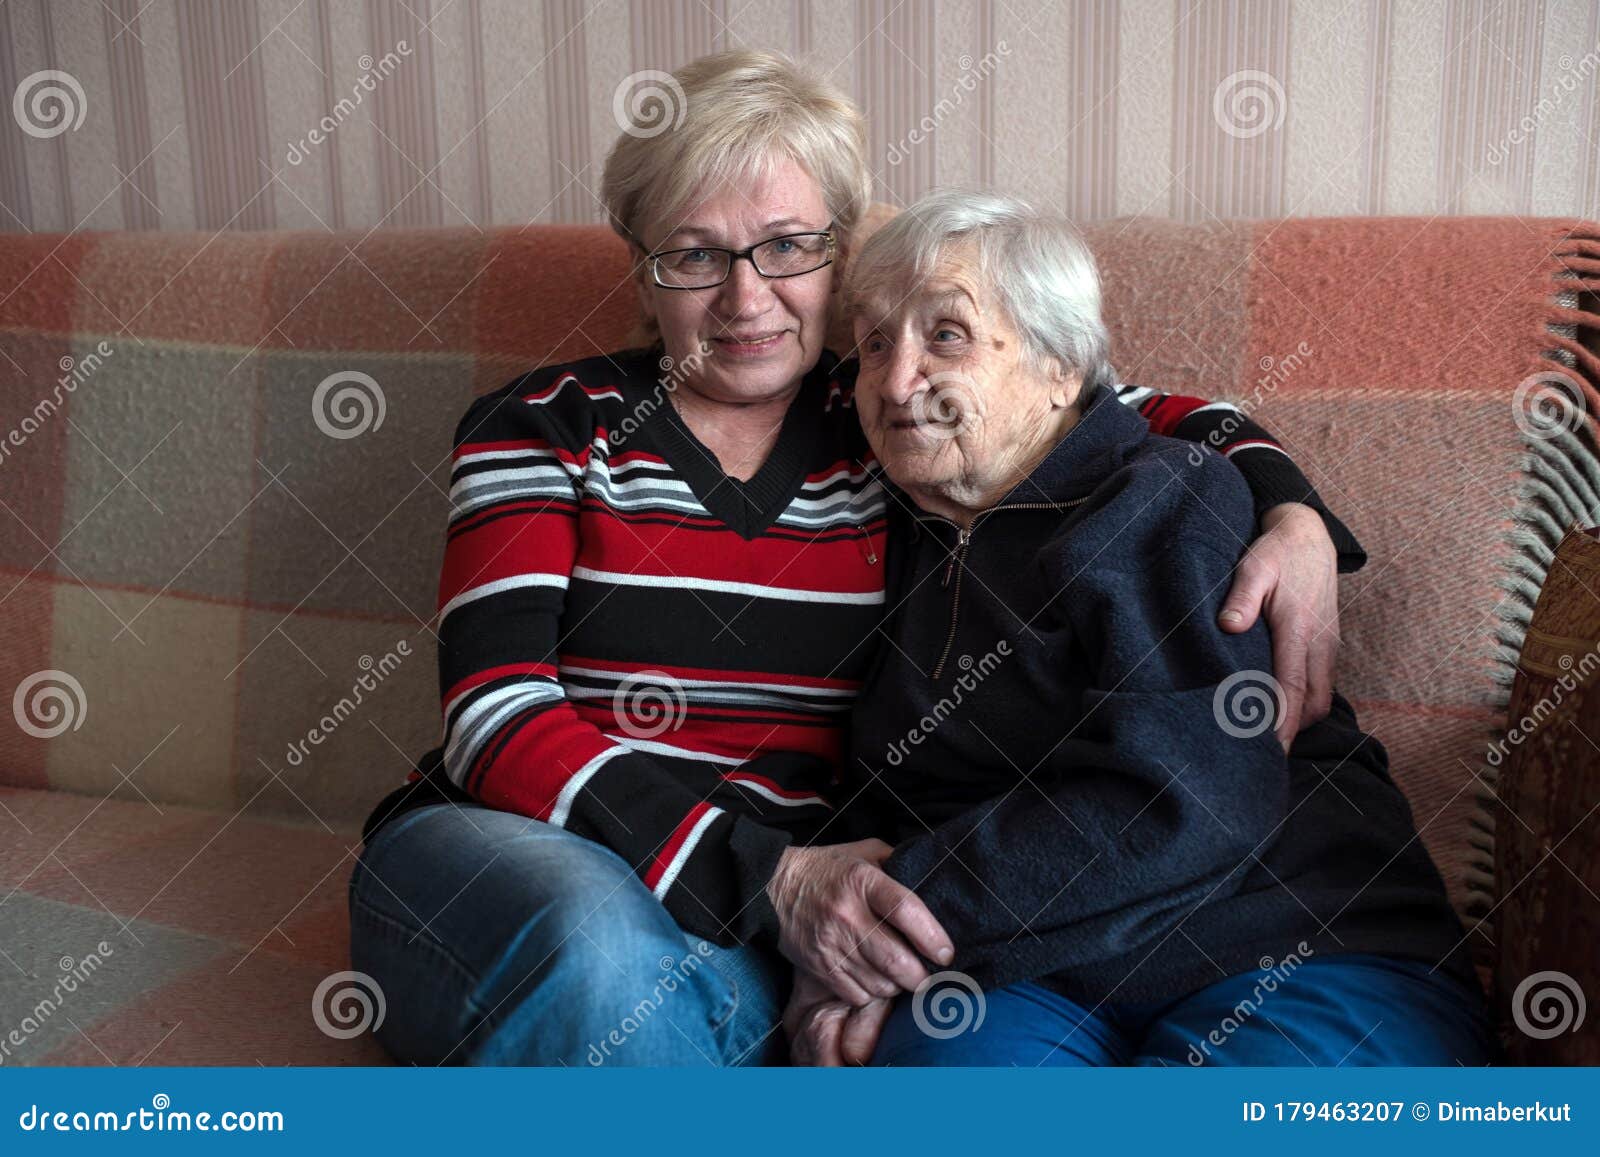 An Old Grandma Woman In An Embrace With His Adult